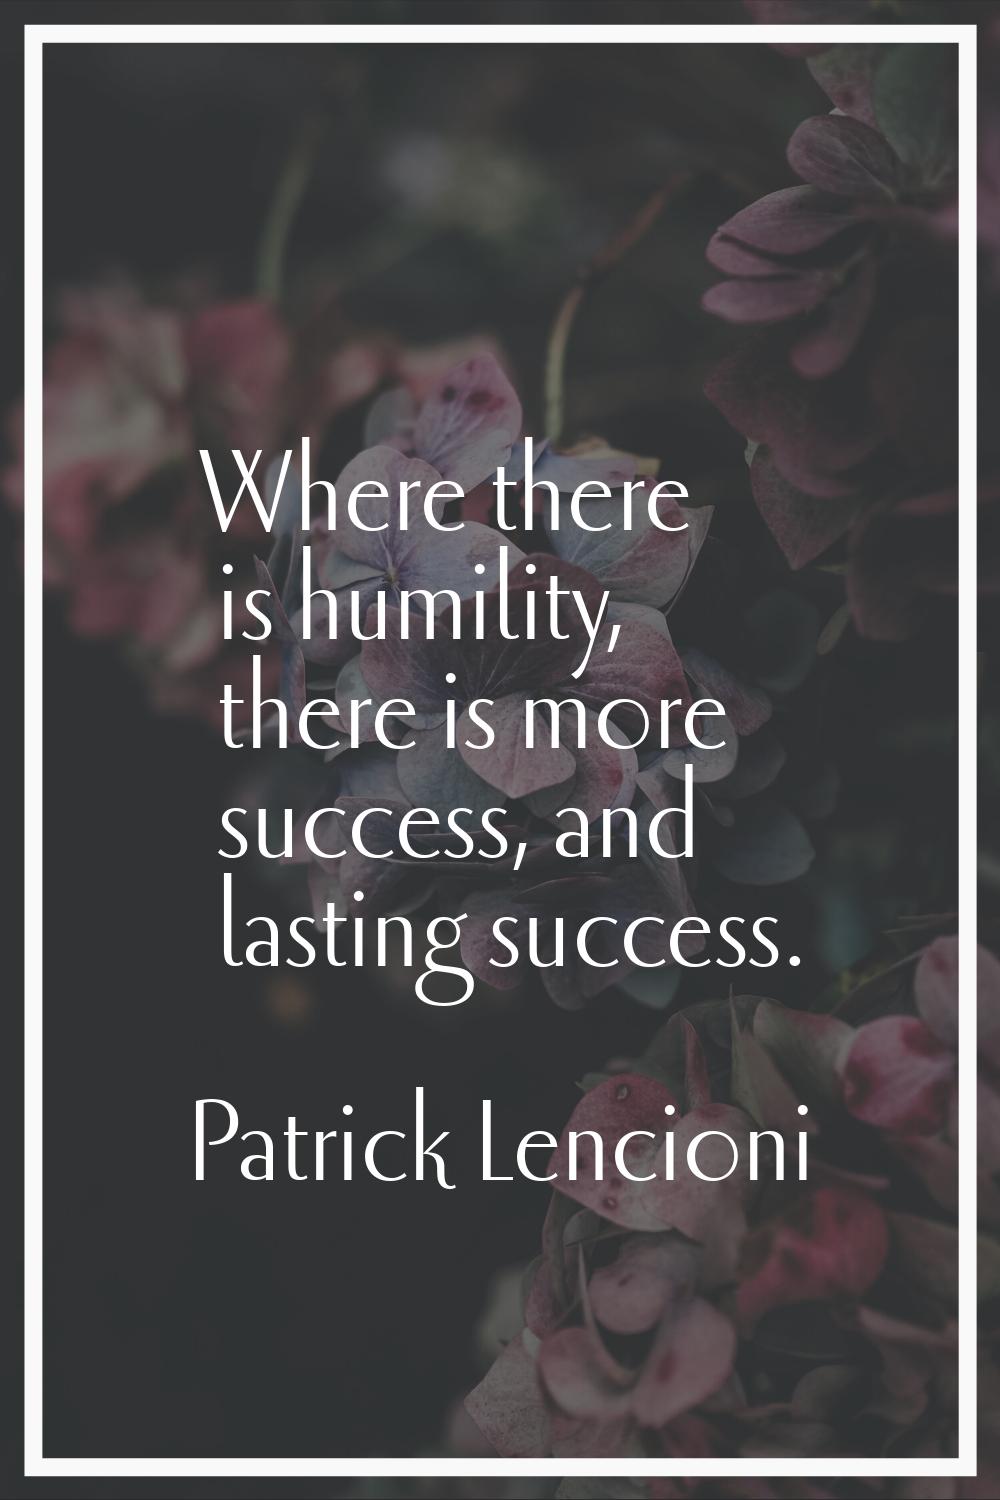 Where there is humility, there is more success, and lasting success.